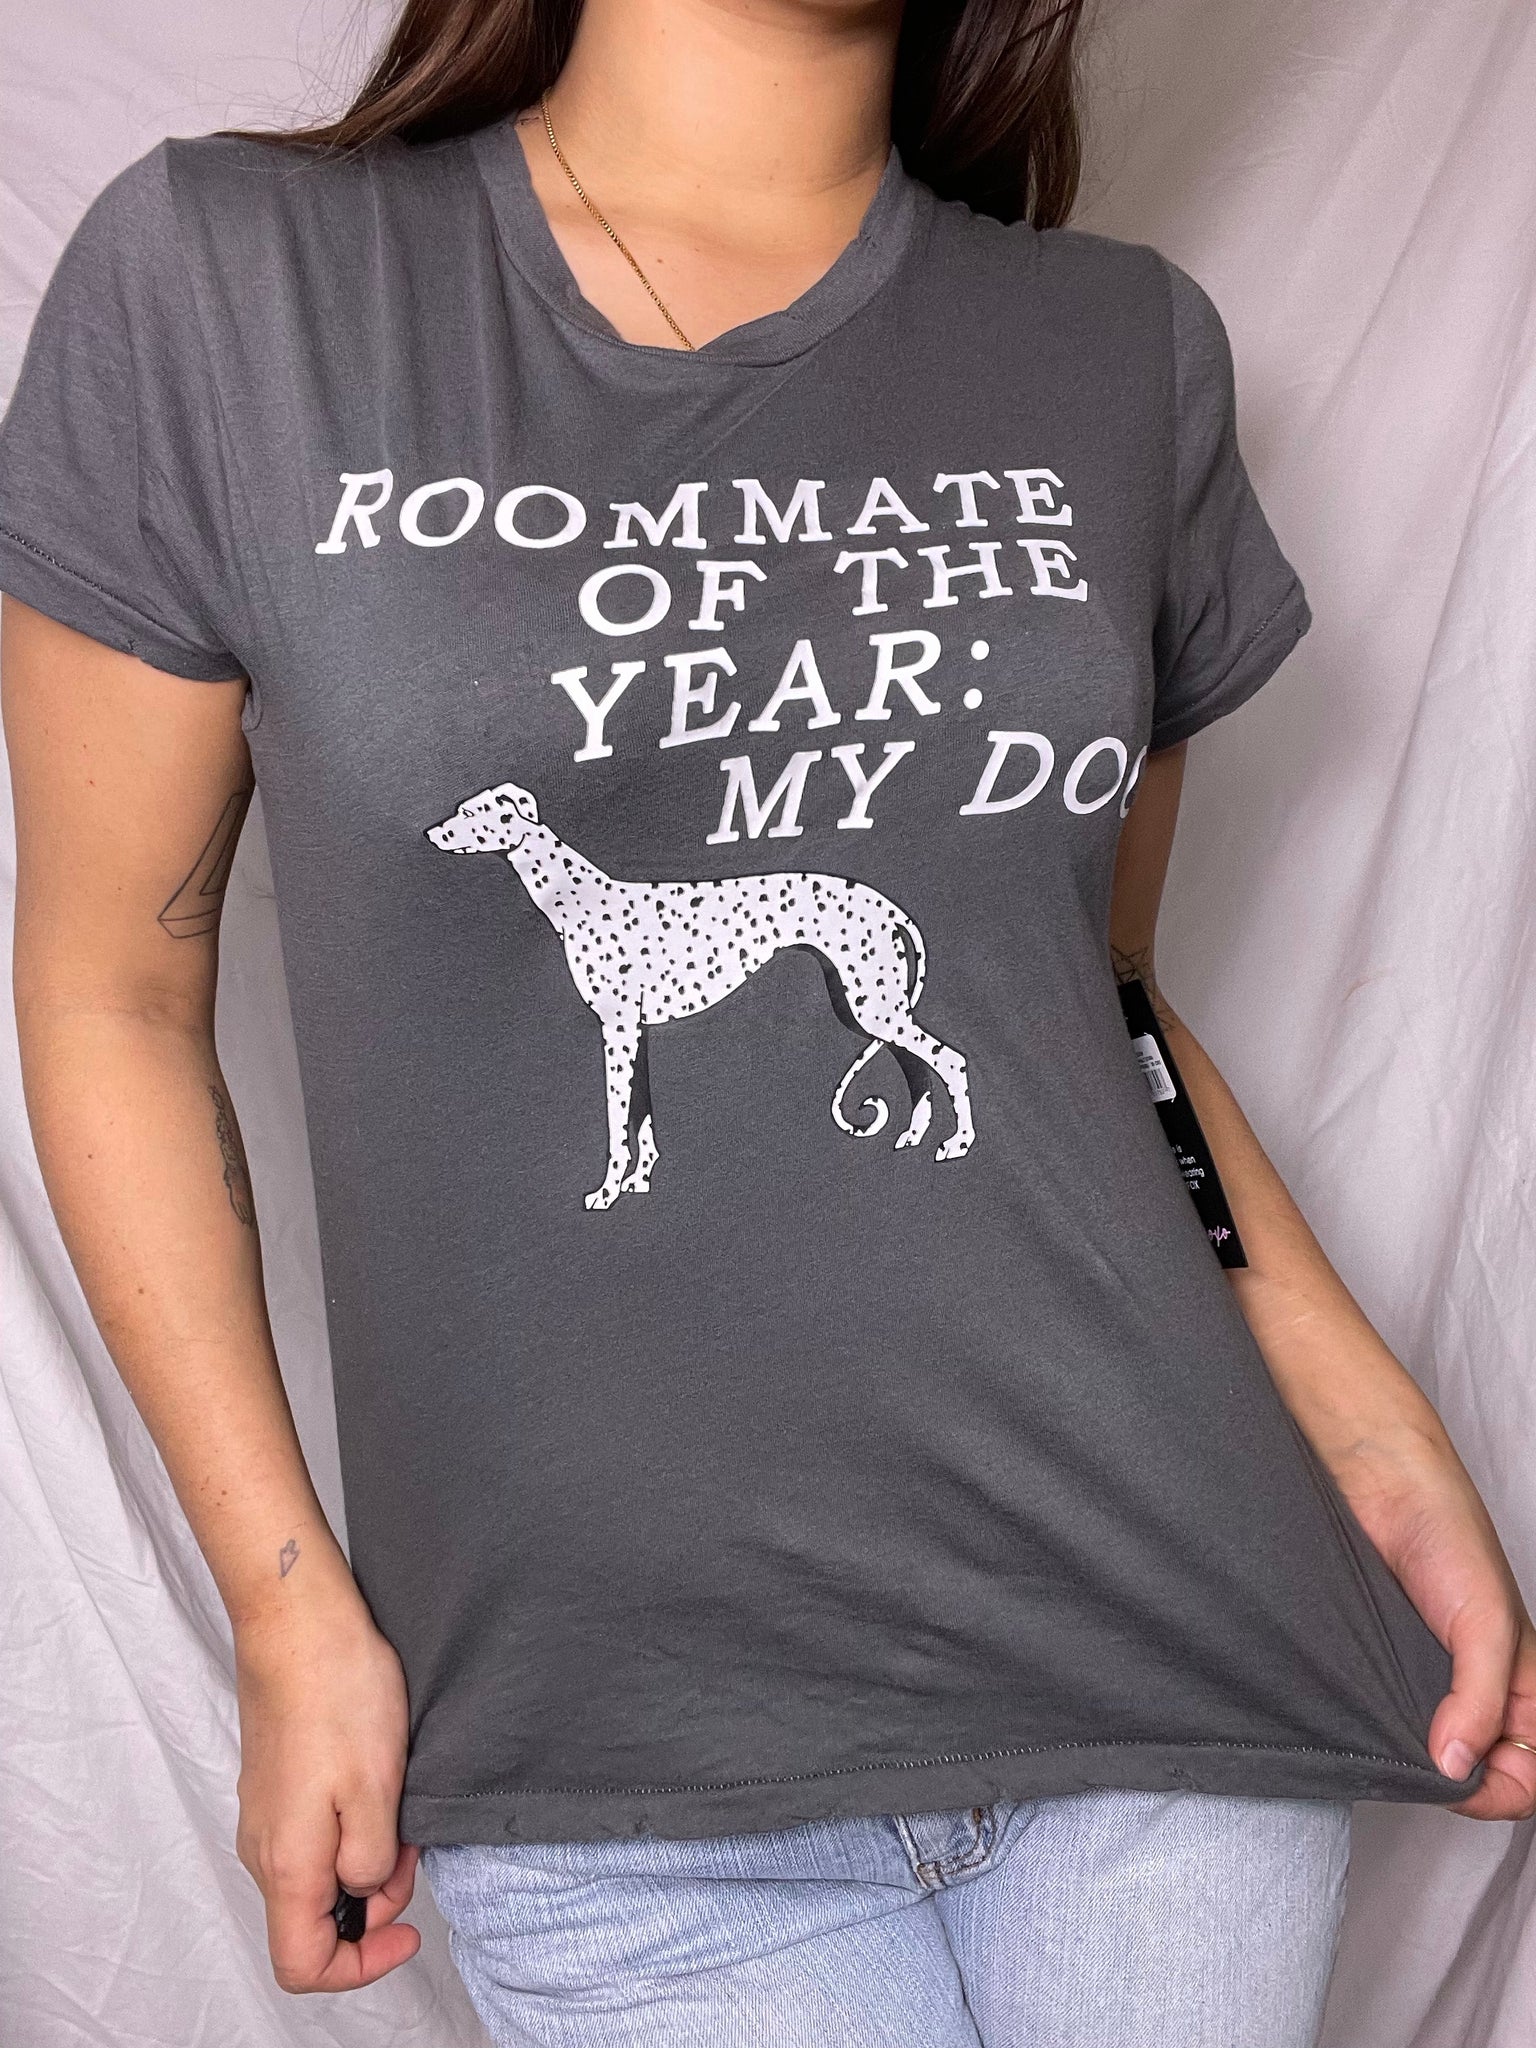 NEW Wildfox roommate tee, Size XS